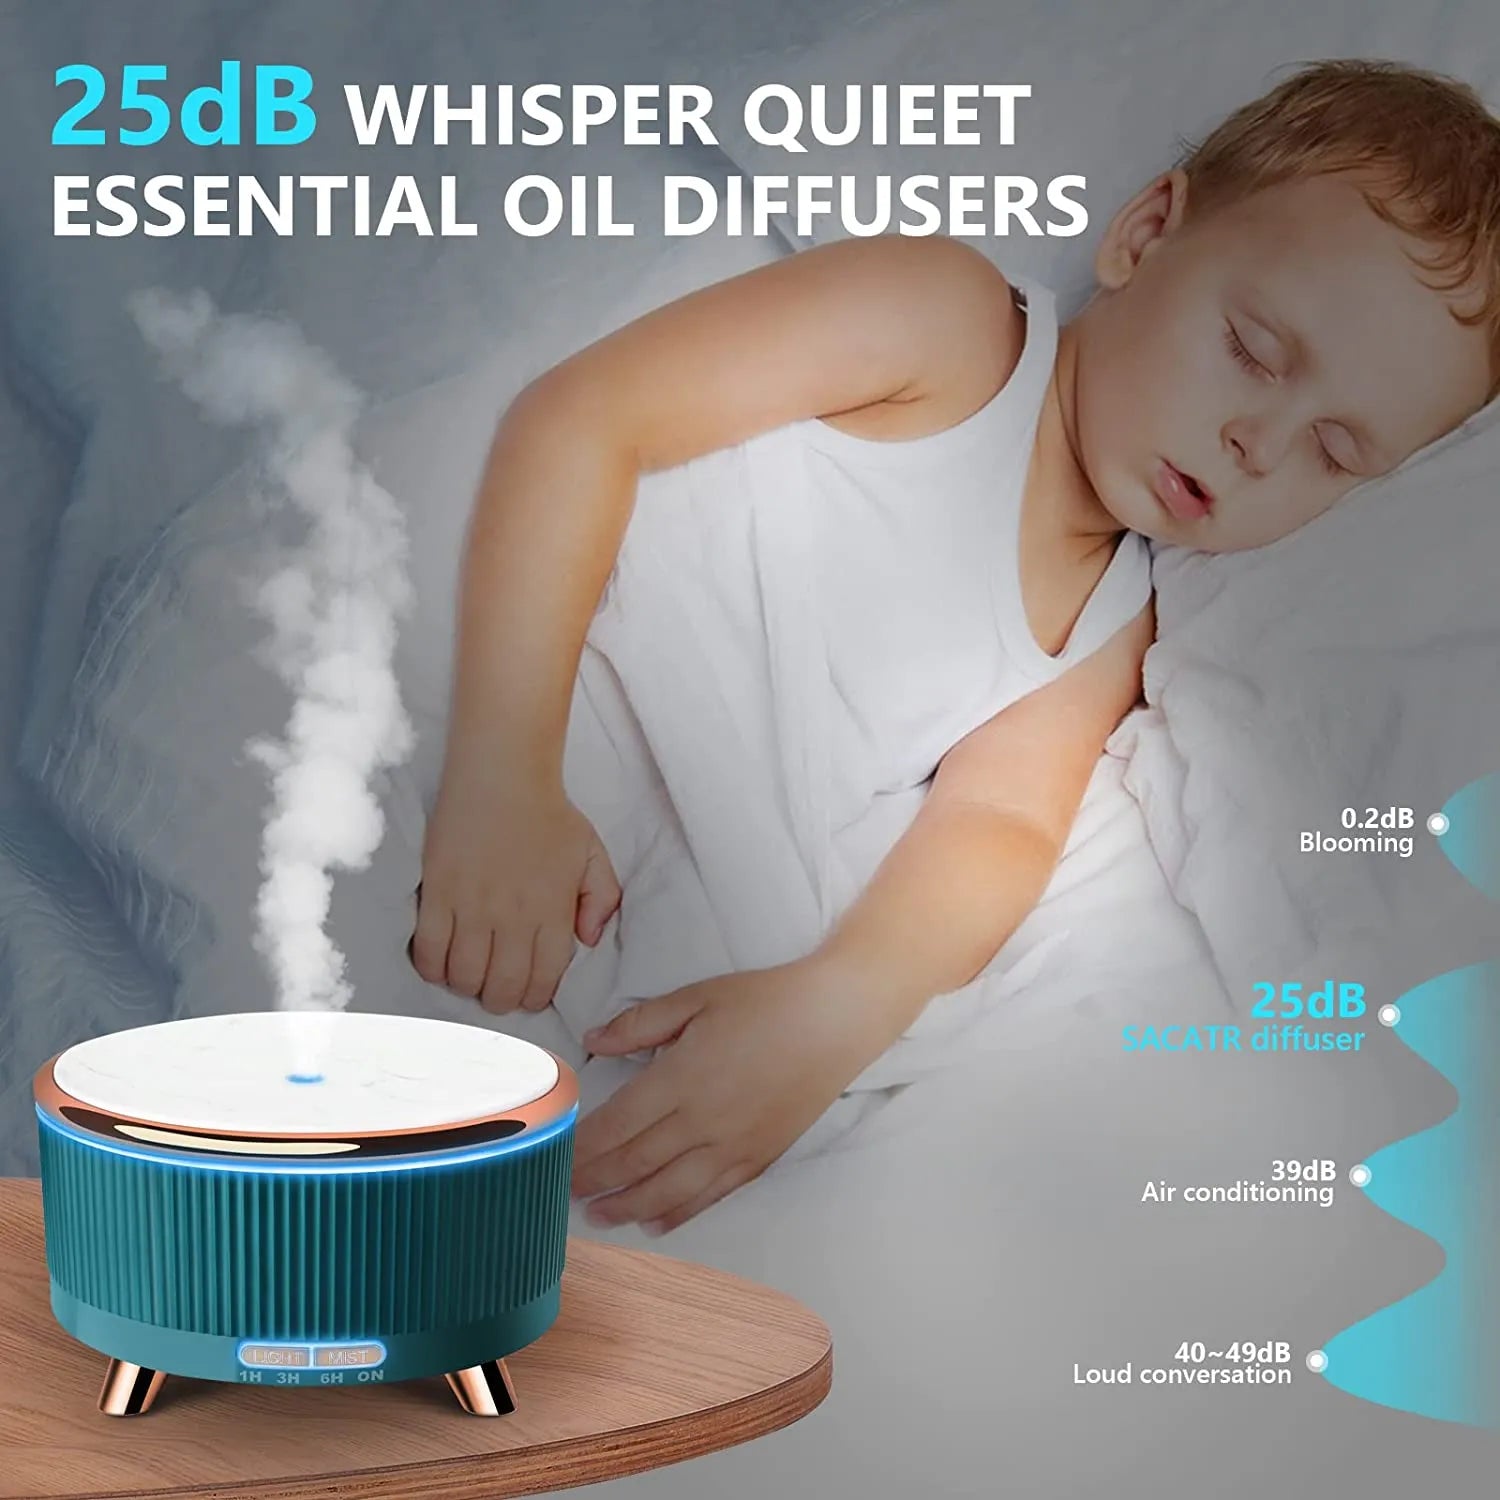 AromaGlow Mistifier : Essential Oil Diffuser - Mag & Doudy